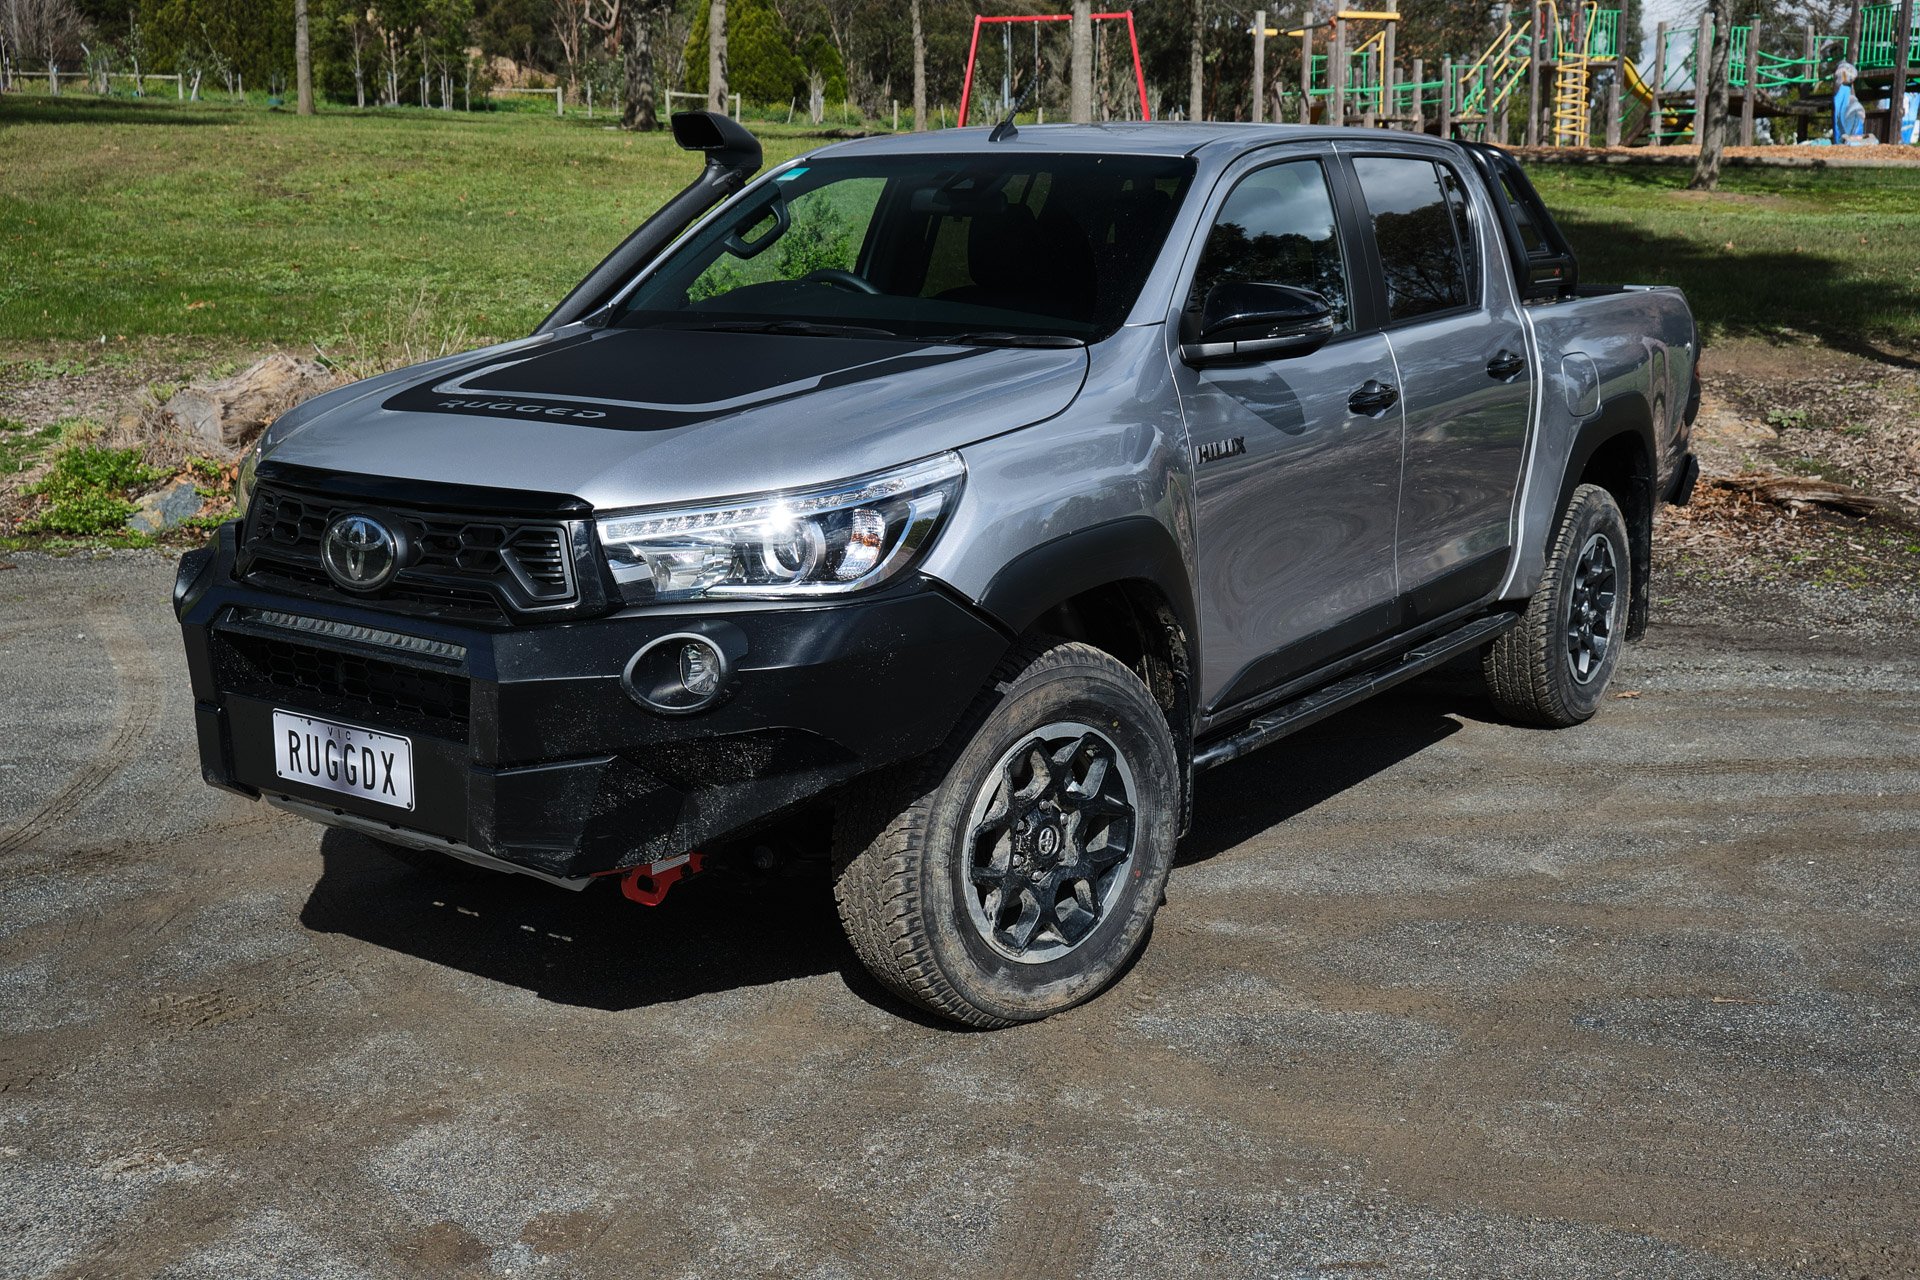 9390bf57 toyota hilux rugged x review 24 of 68 - Auto Recent